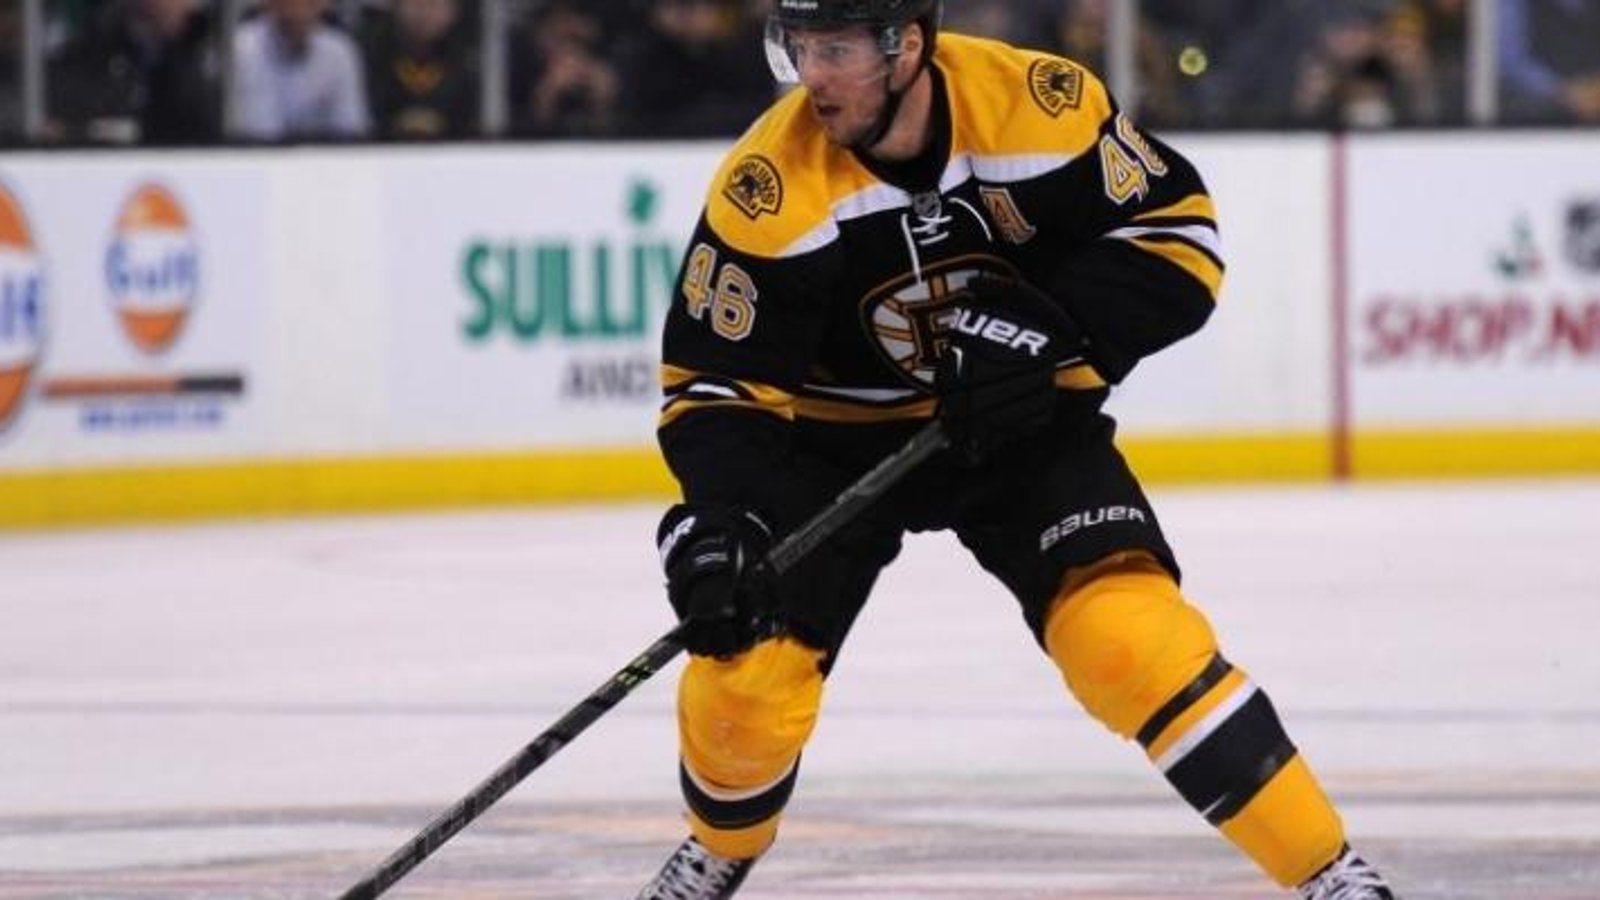 How The Bruins Fared Without David Krejci